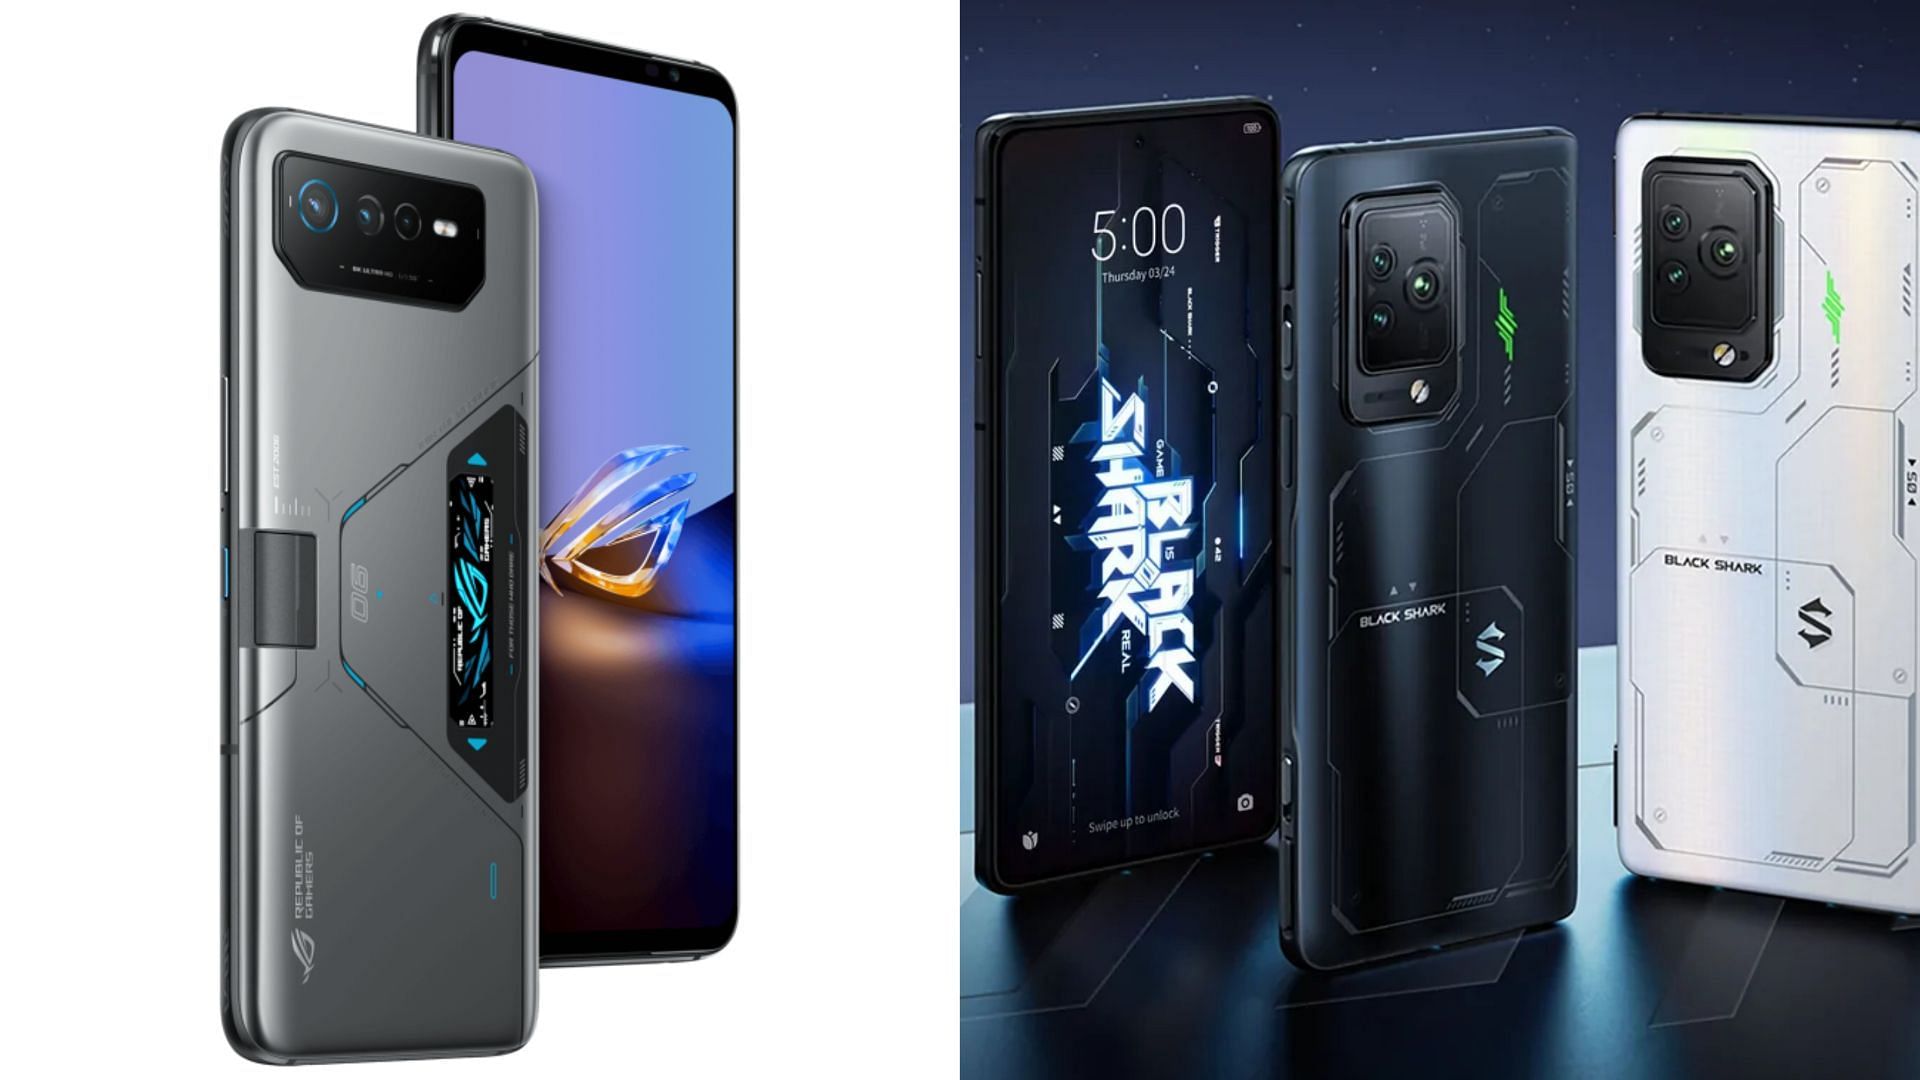 The better choice, ROG Phone 6D Ultimate or Black Shark 5 Pro? (Image by Asus and Xiaomi)